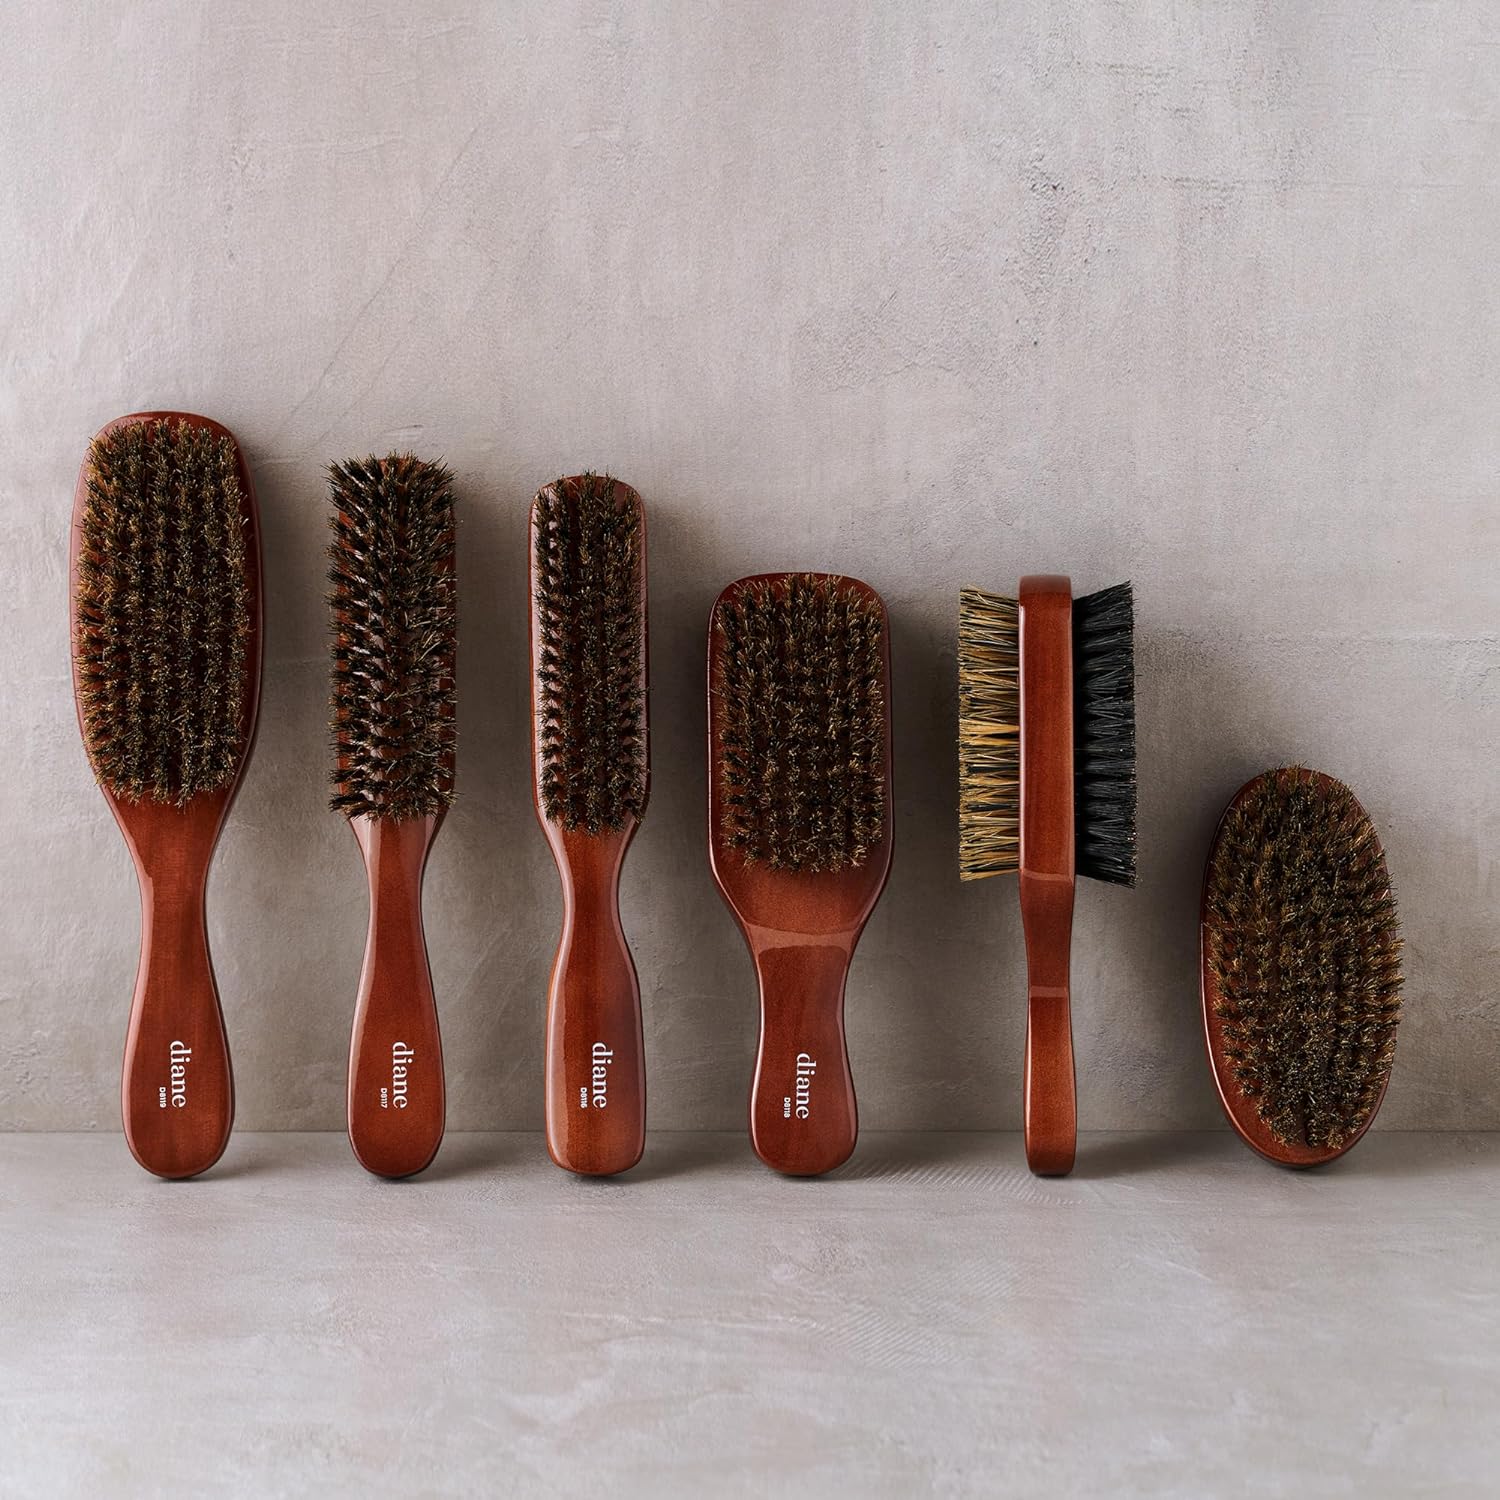 Diane Premium 100% Boar Bristle Styling Brush for Men and Barbers – Medium Bristles for Thick Coarse Hair – Use for Detangling, Smoothing, Wave Styles, Soft on Scalp, Restore Shine and Texture : Hair Brushes : Beauty & Personal Care